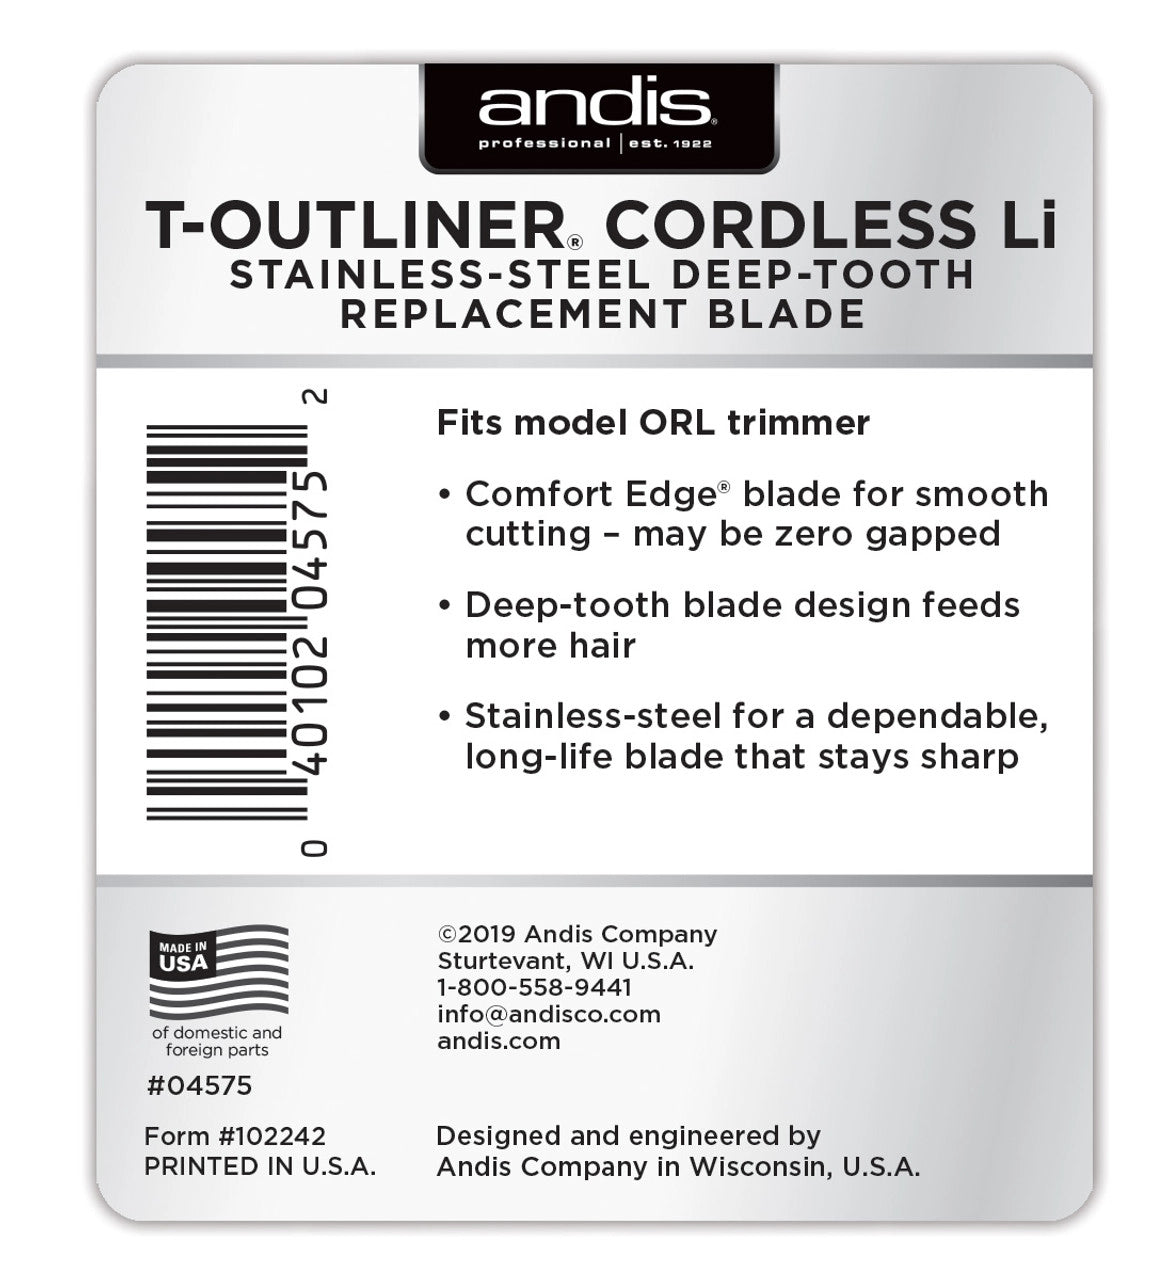 Andis Professional T-Outliner Cordless Li Stainless Steel Deep Tooth Replacement Blade